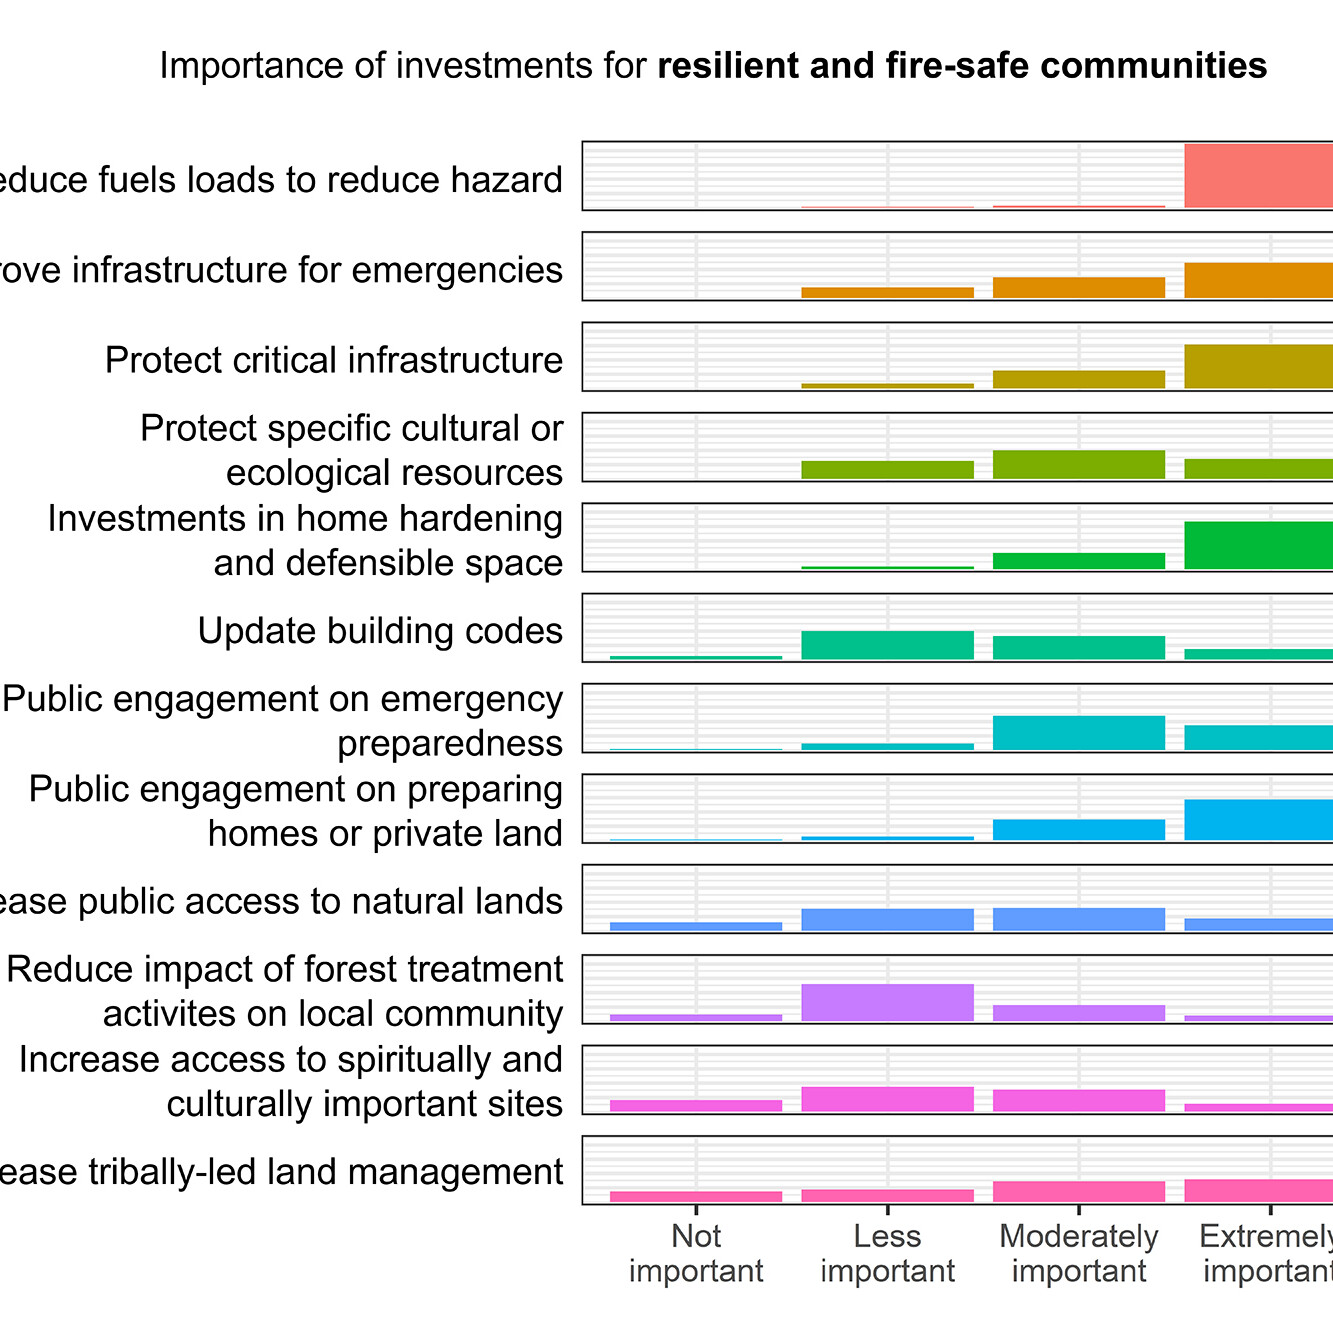 Importance of Investments for Resilient and Fire-Safe Communities Histogram